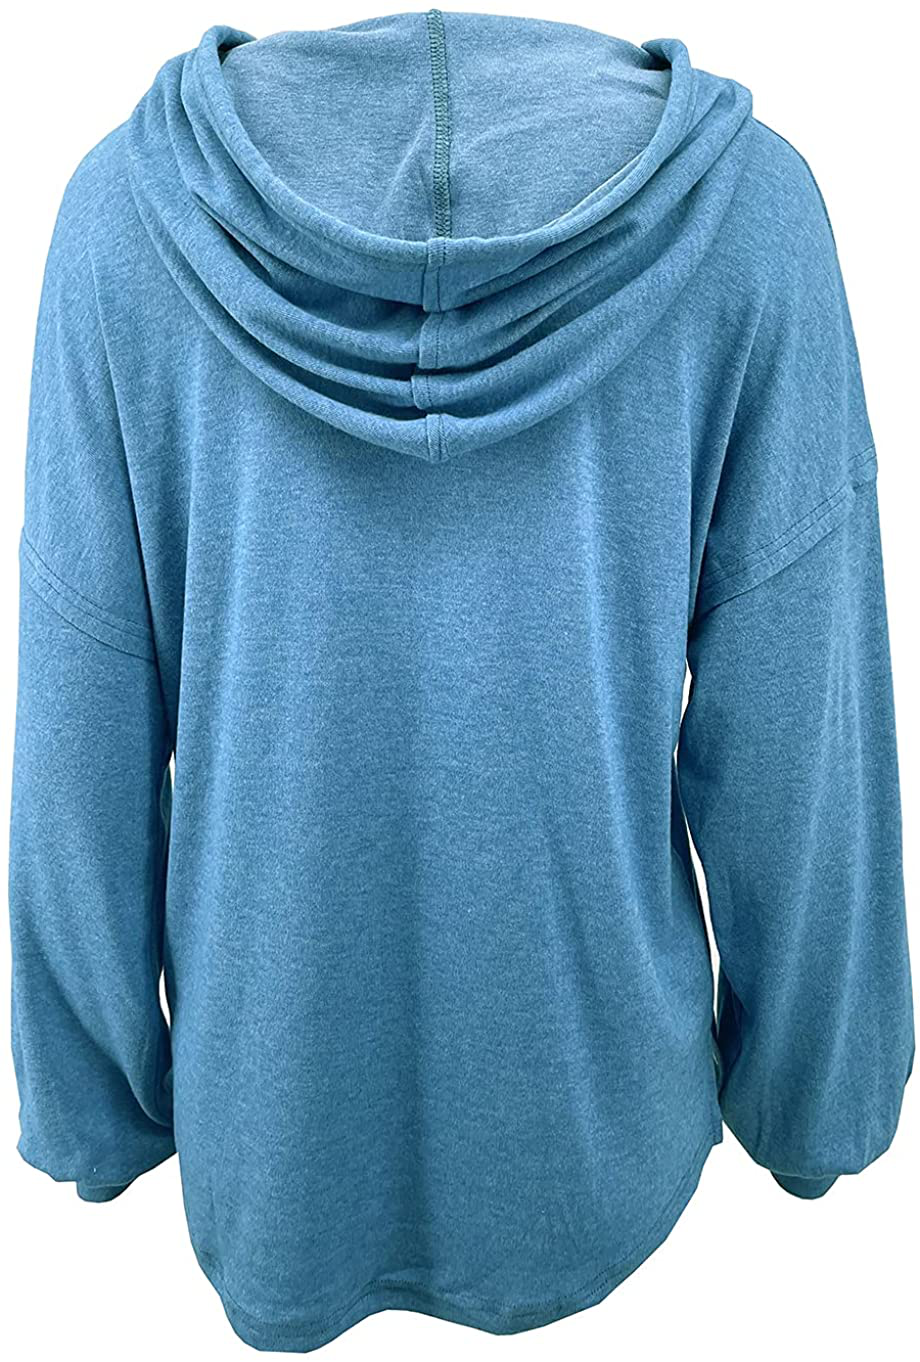 Women Button Up Hoodies Loose Hooded Long Sleeve V Neck Pullover Casual Lightweight Drawstring Sweatshirt